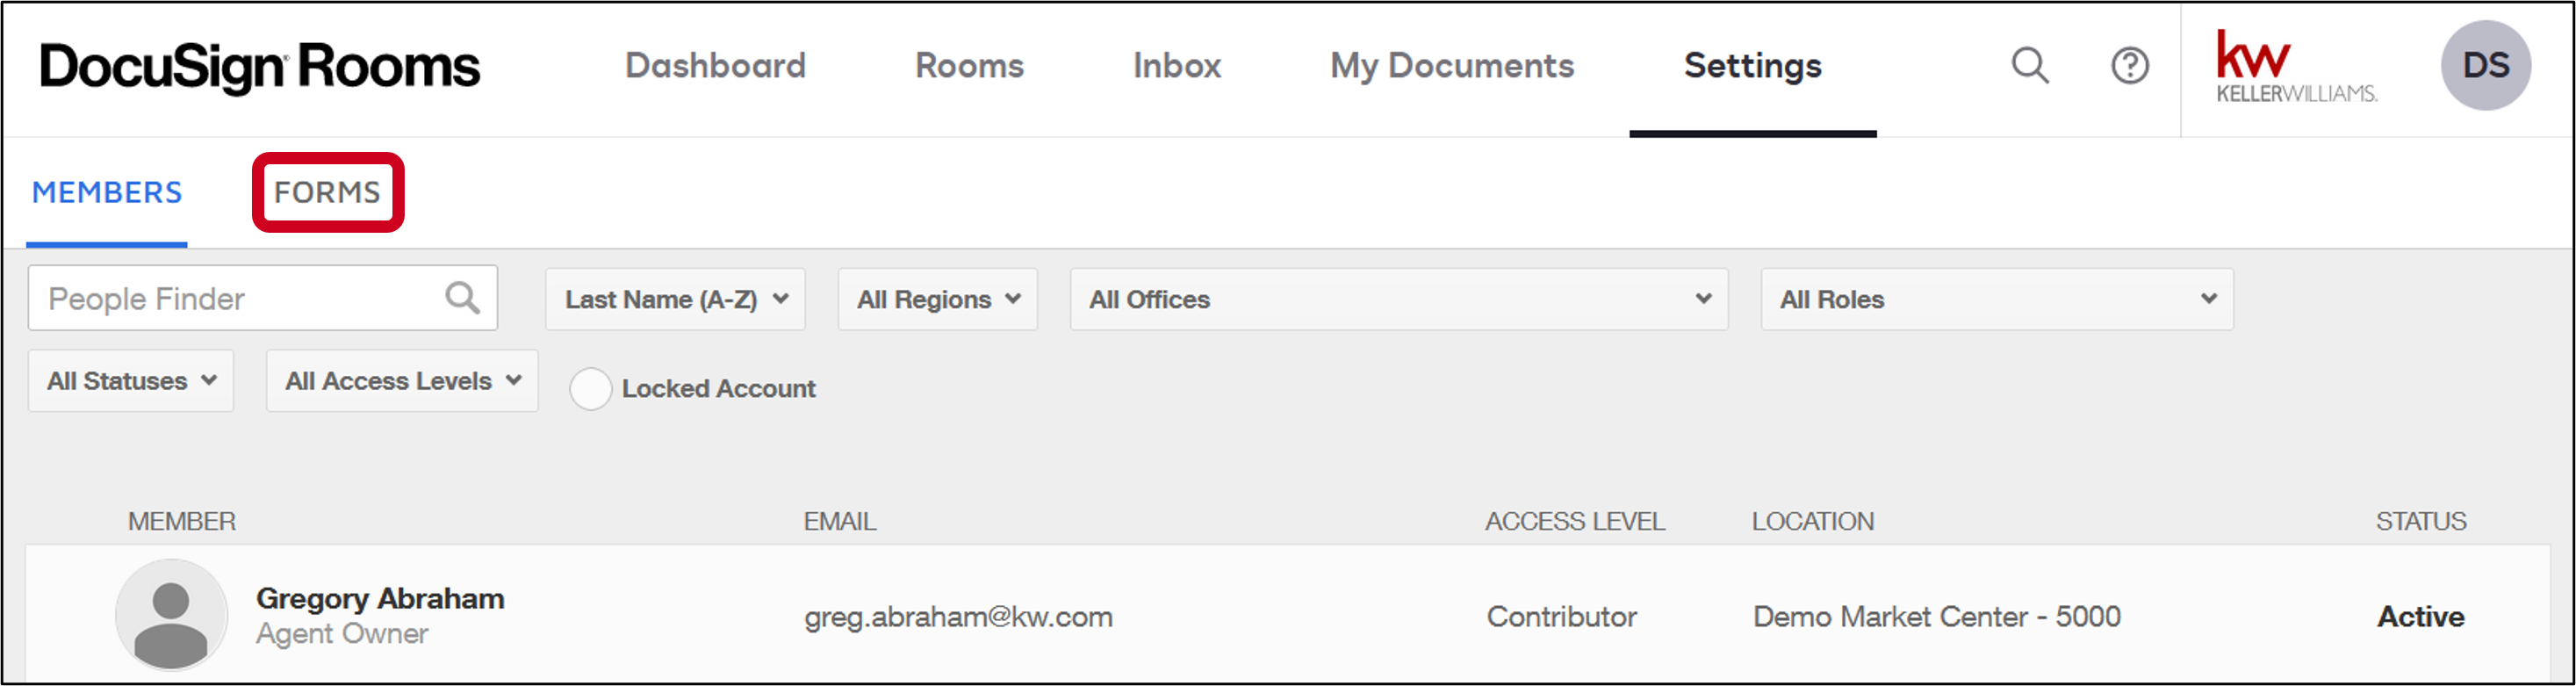 cmc_docusign_settings_forms_tab.png